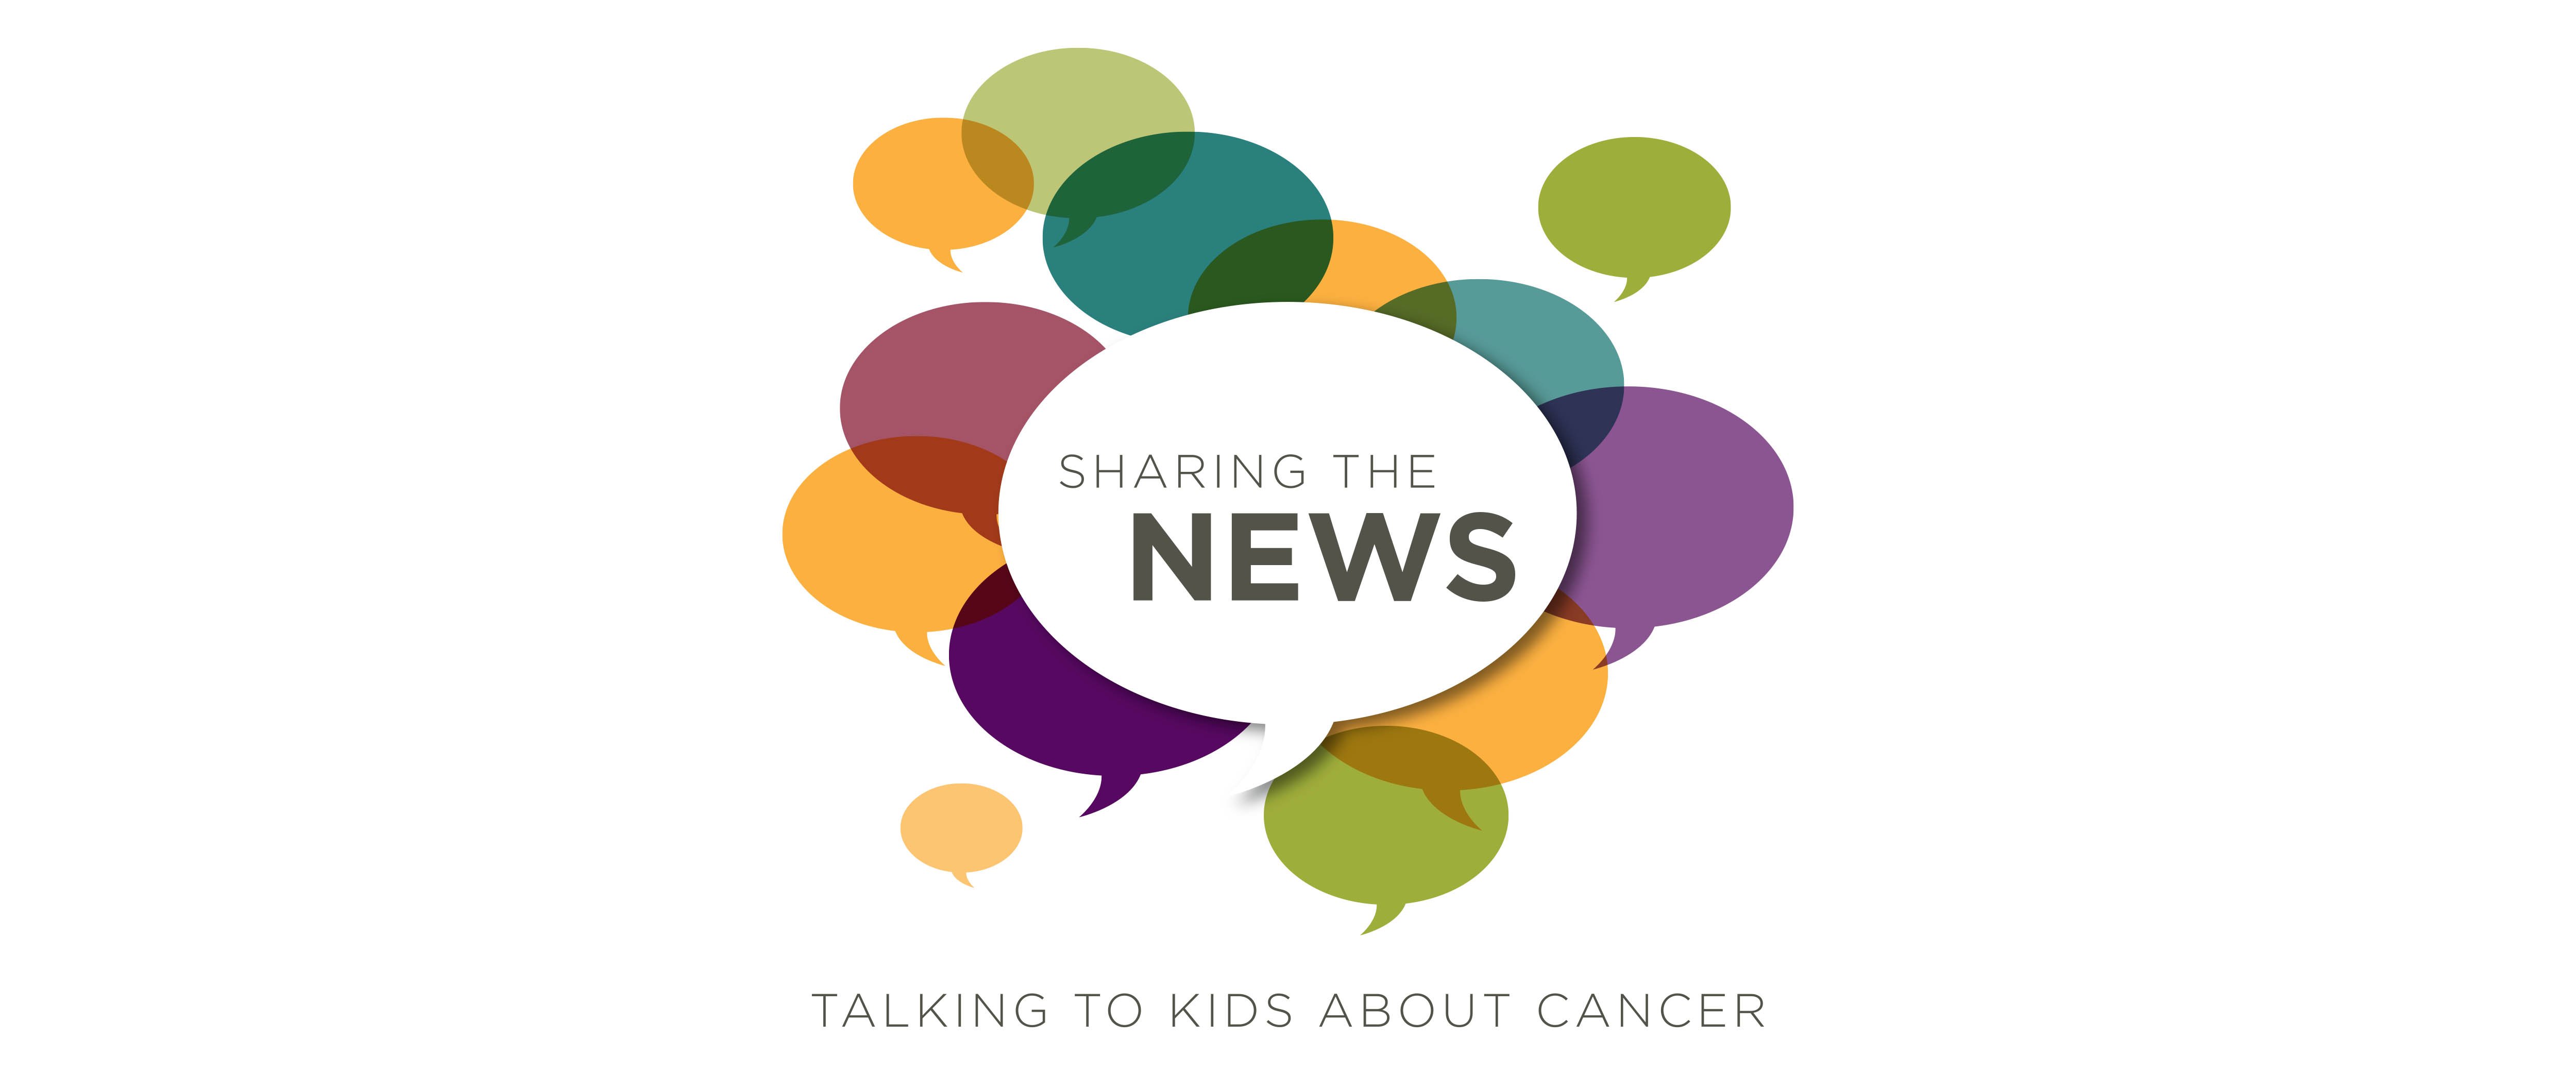 SHARING THE NEWS: TALKING TO KIDS ABOUT CANCER